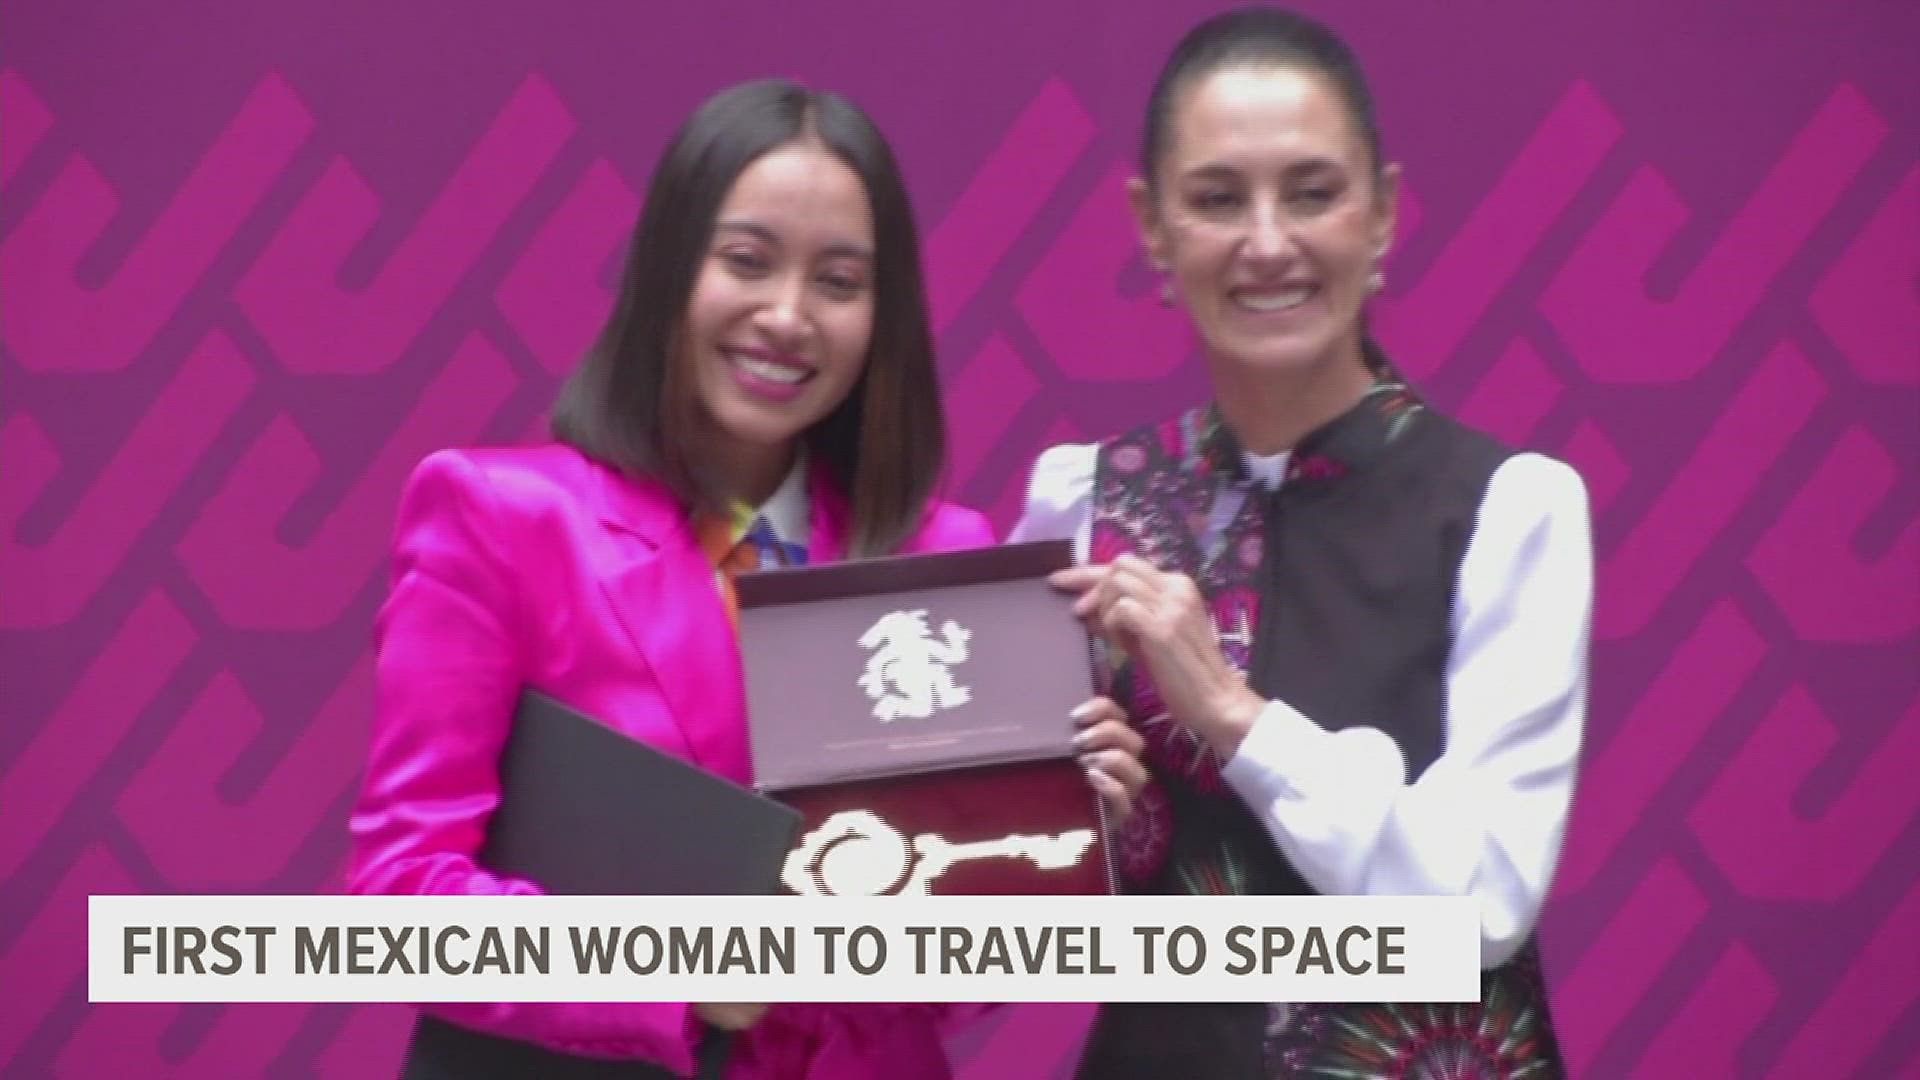 Katya Echezarreta became the first Mexican woman to visit outer space in early June. She was given the keys to Mexico City and is held up as a role model.